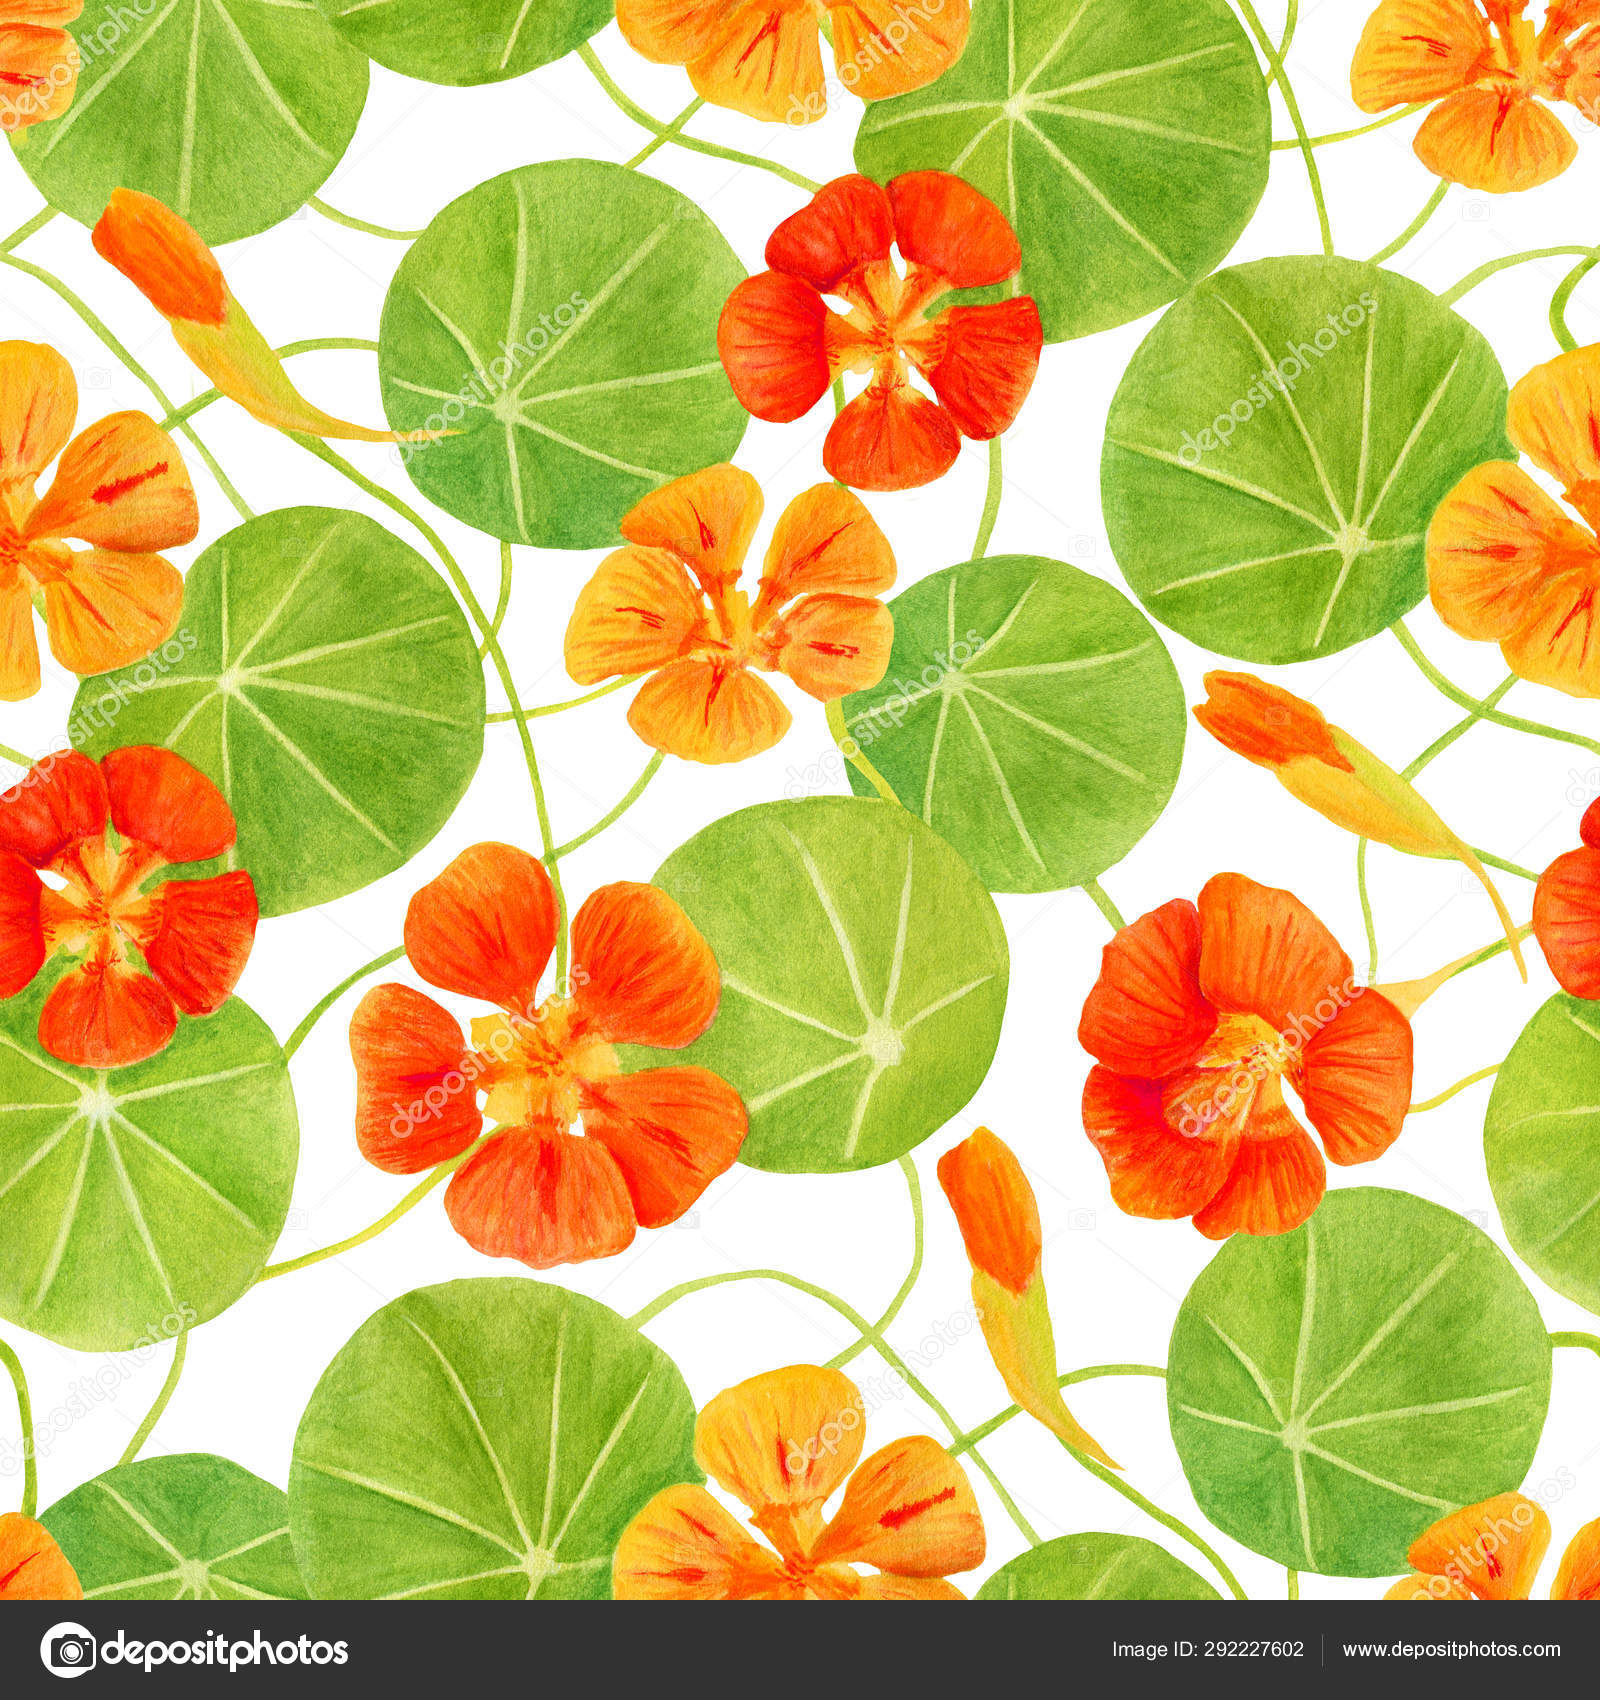 Red Orange Yellow Nasturtium Flowers And Leaves Seamless Pattern Hand Drawn Botanical Watercolor Illustration With Garden Flowers Floral Decoration For Invitation Greeting Cards Textile Print Stock Photo C Olya Haifisch 292227602